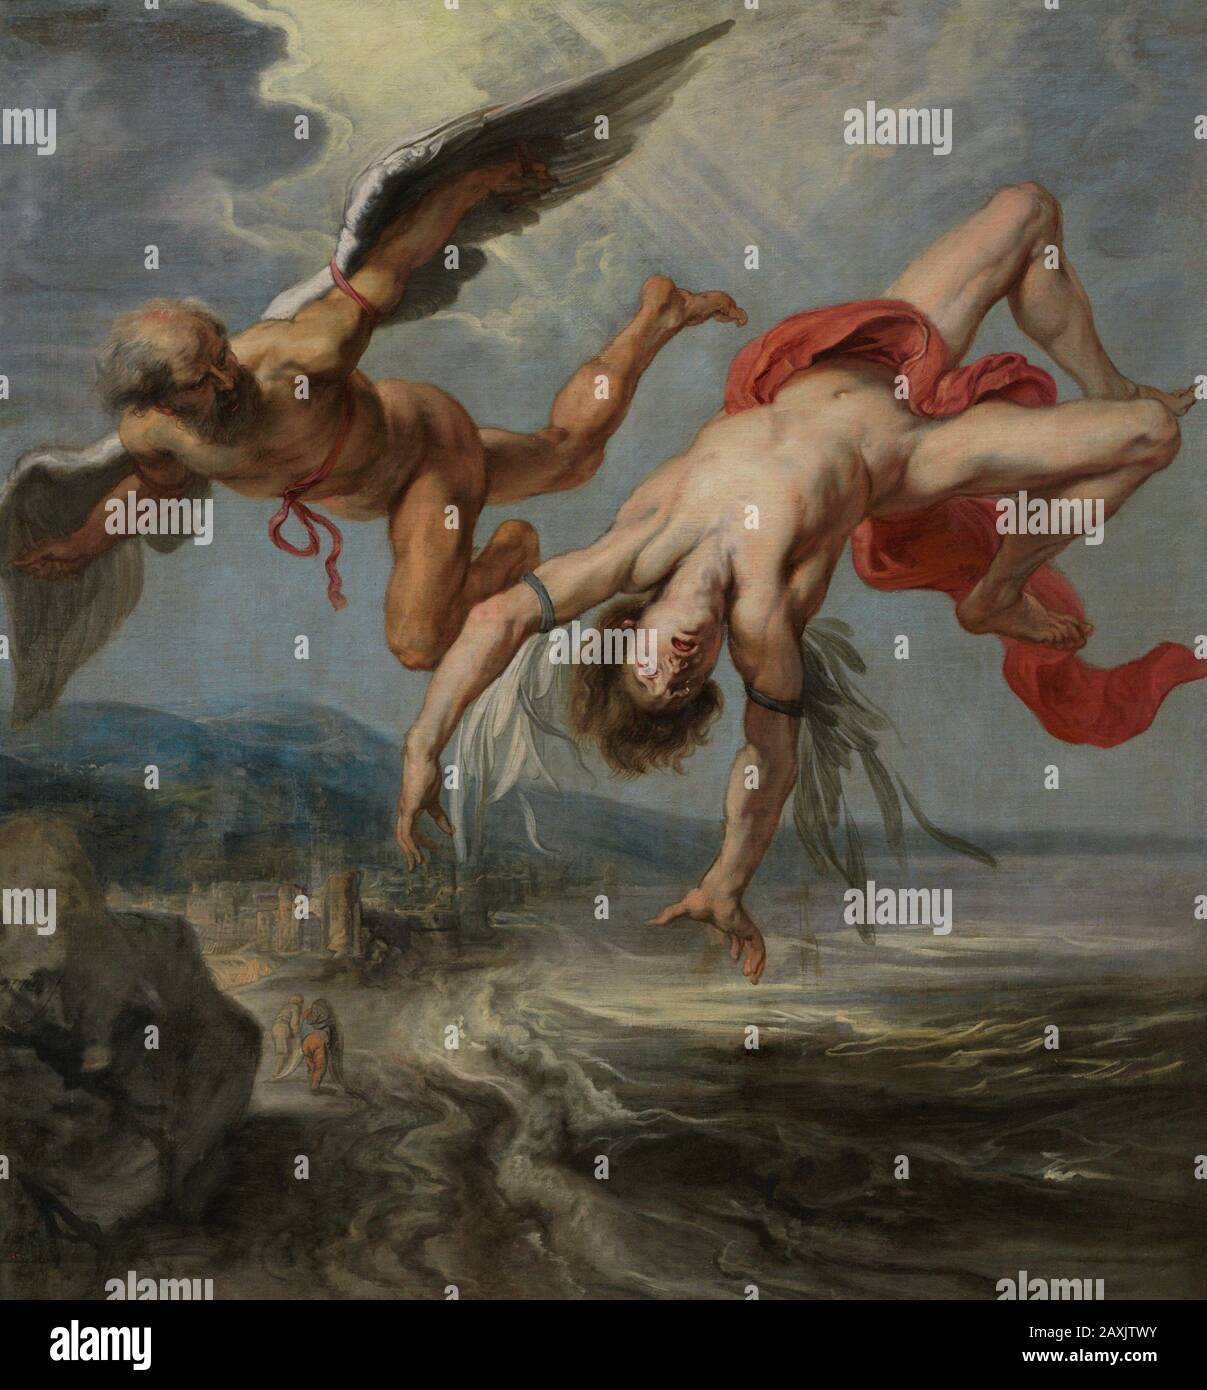 Jacob Peter Gowy (1615-1661). Flemish Baroque painter. The fall of Icarus, 1636-1637. Museum of Fine Arts. A Coruña, Galicia, Spain. (On loan, Prado Museum, Madrid). Stock Photo